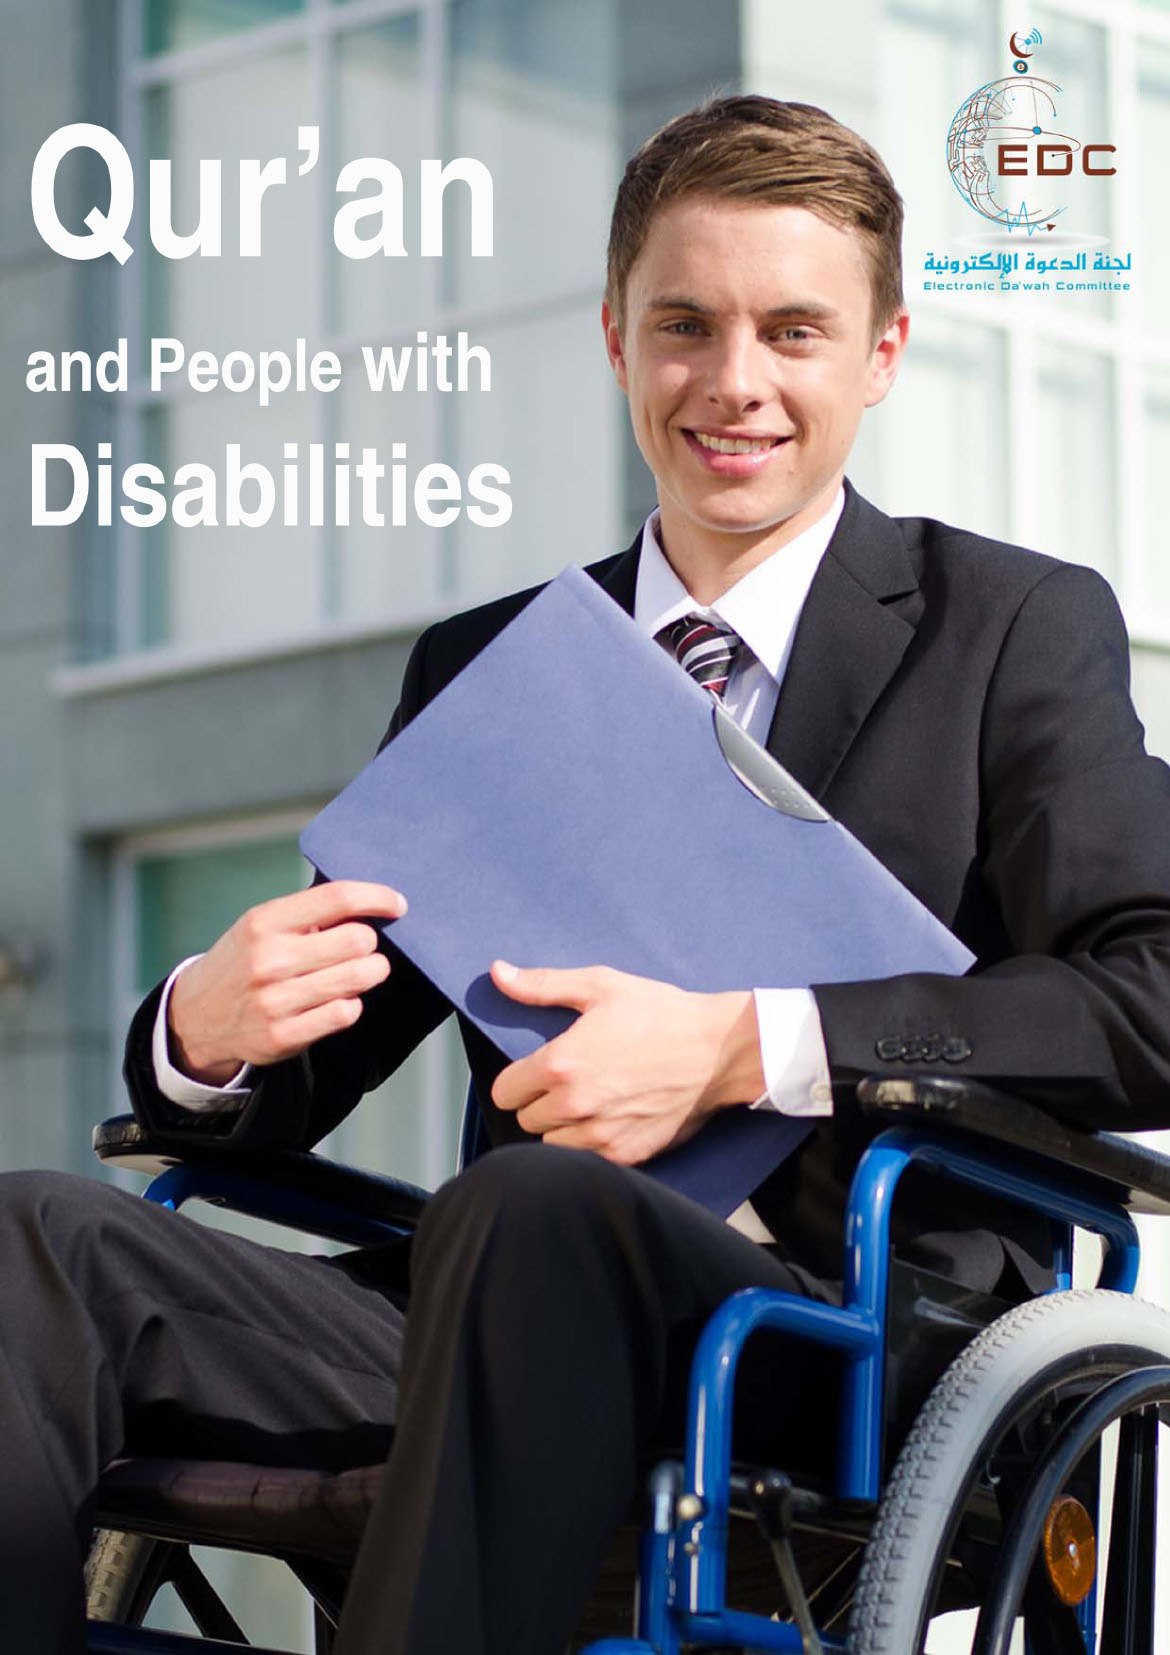 Qur’an and People with Disabilities